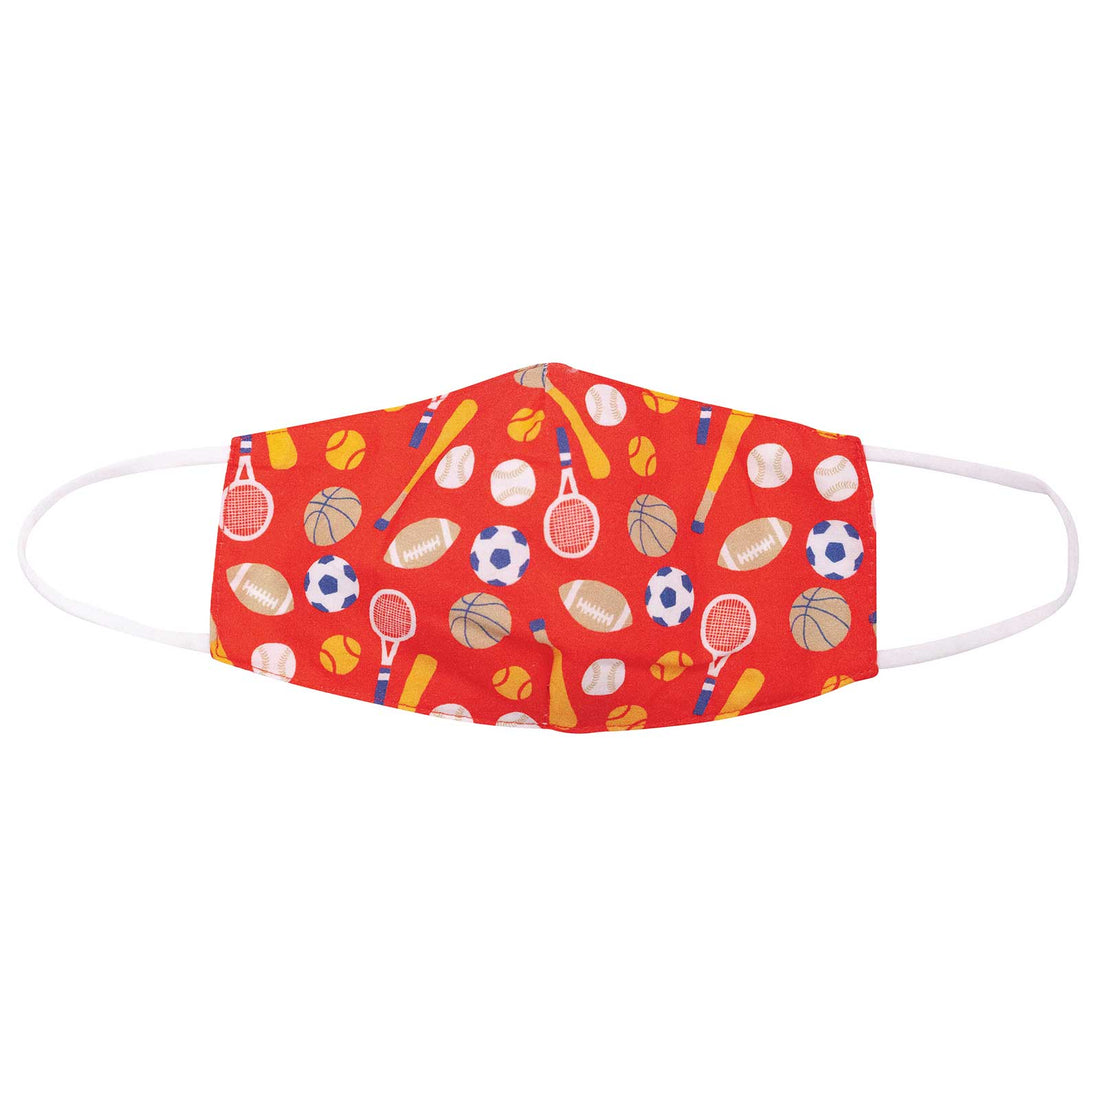 Sports Red Reusable Cotton Kid’s Mask Mask - rockflowerpaper